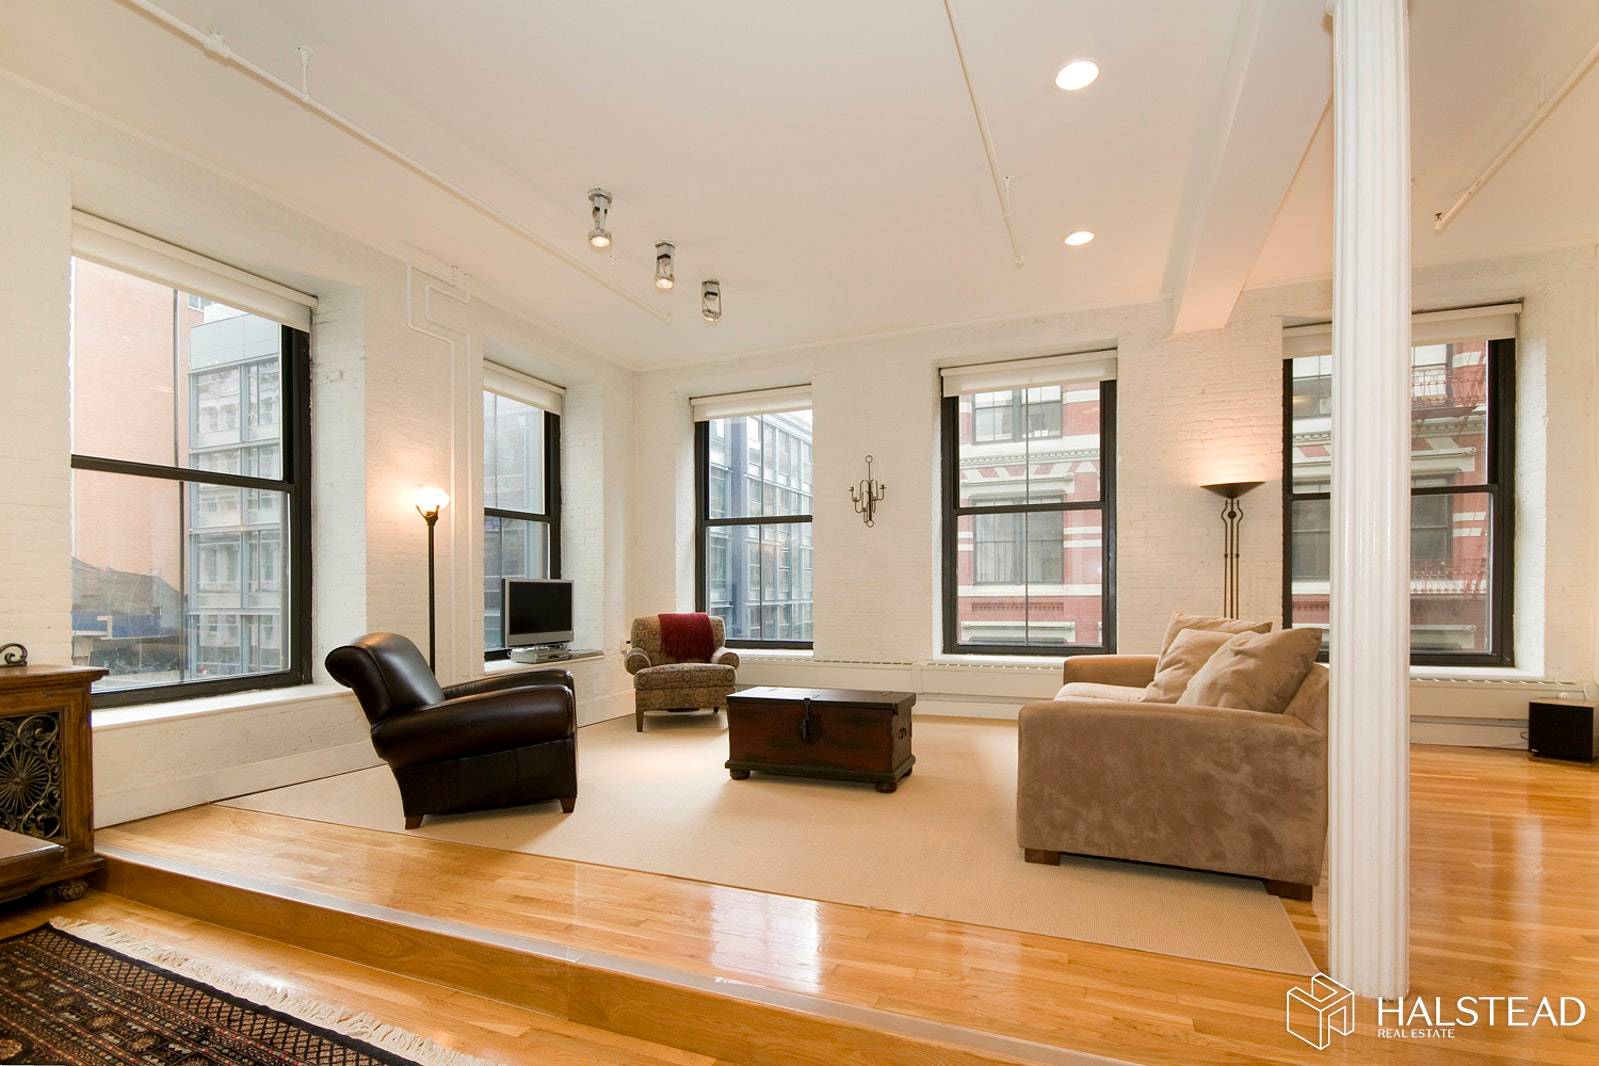 This fabulous 1700 square foot loft in the heart of historic SoHo, at Grand and Mercer, offers all the quintessential elements of an artist loft in a unique historic building ...